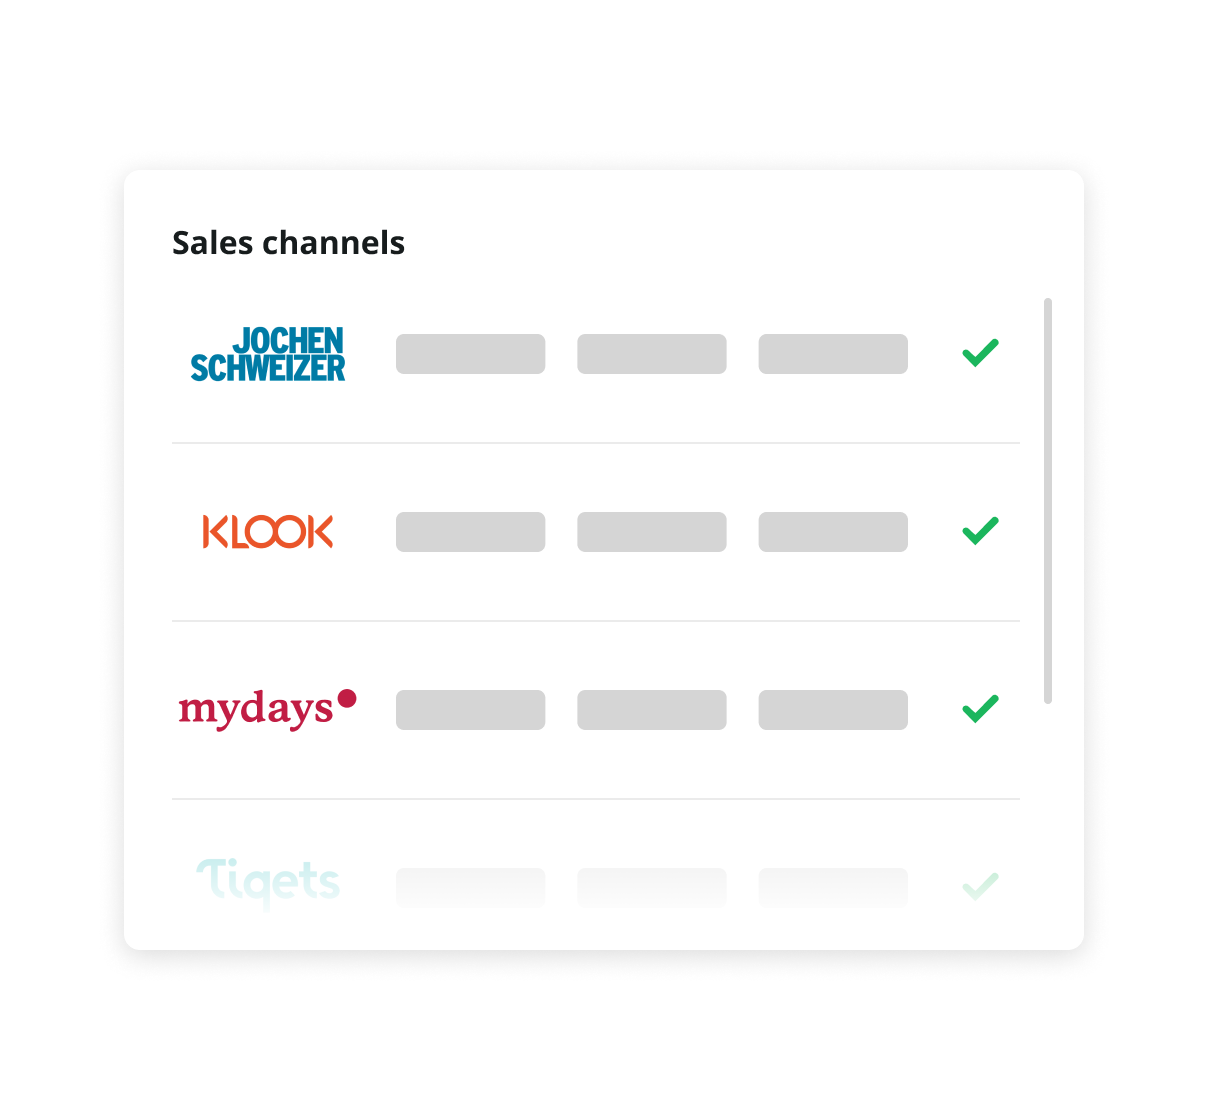 Compare sales channels